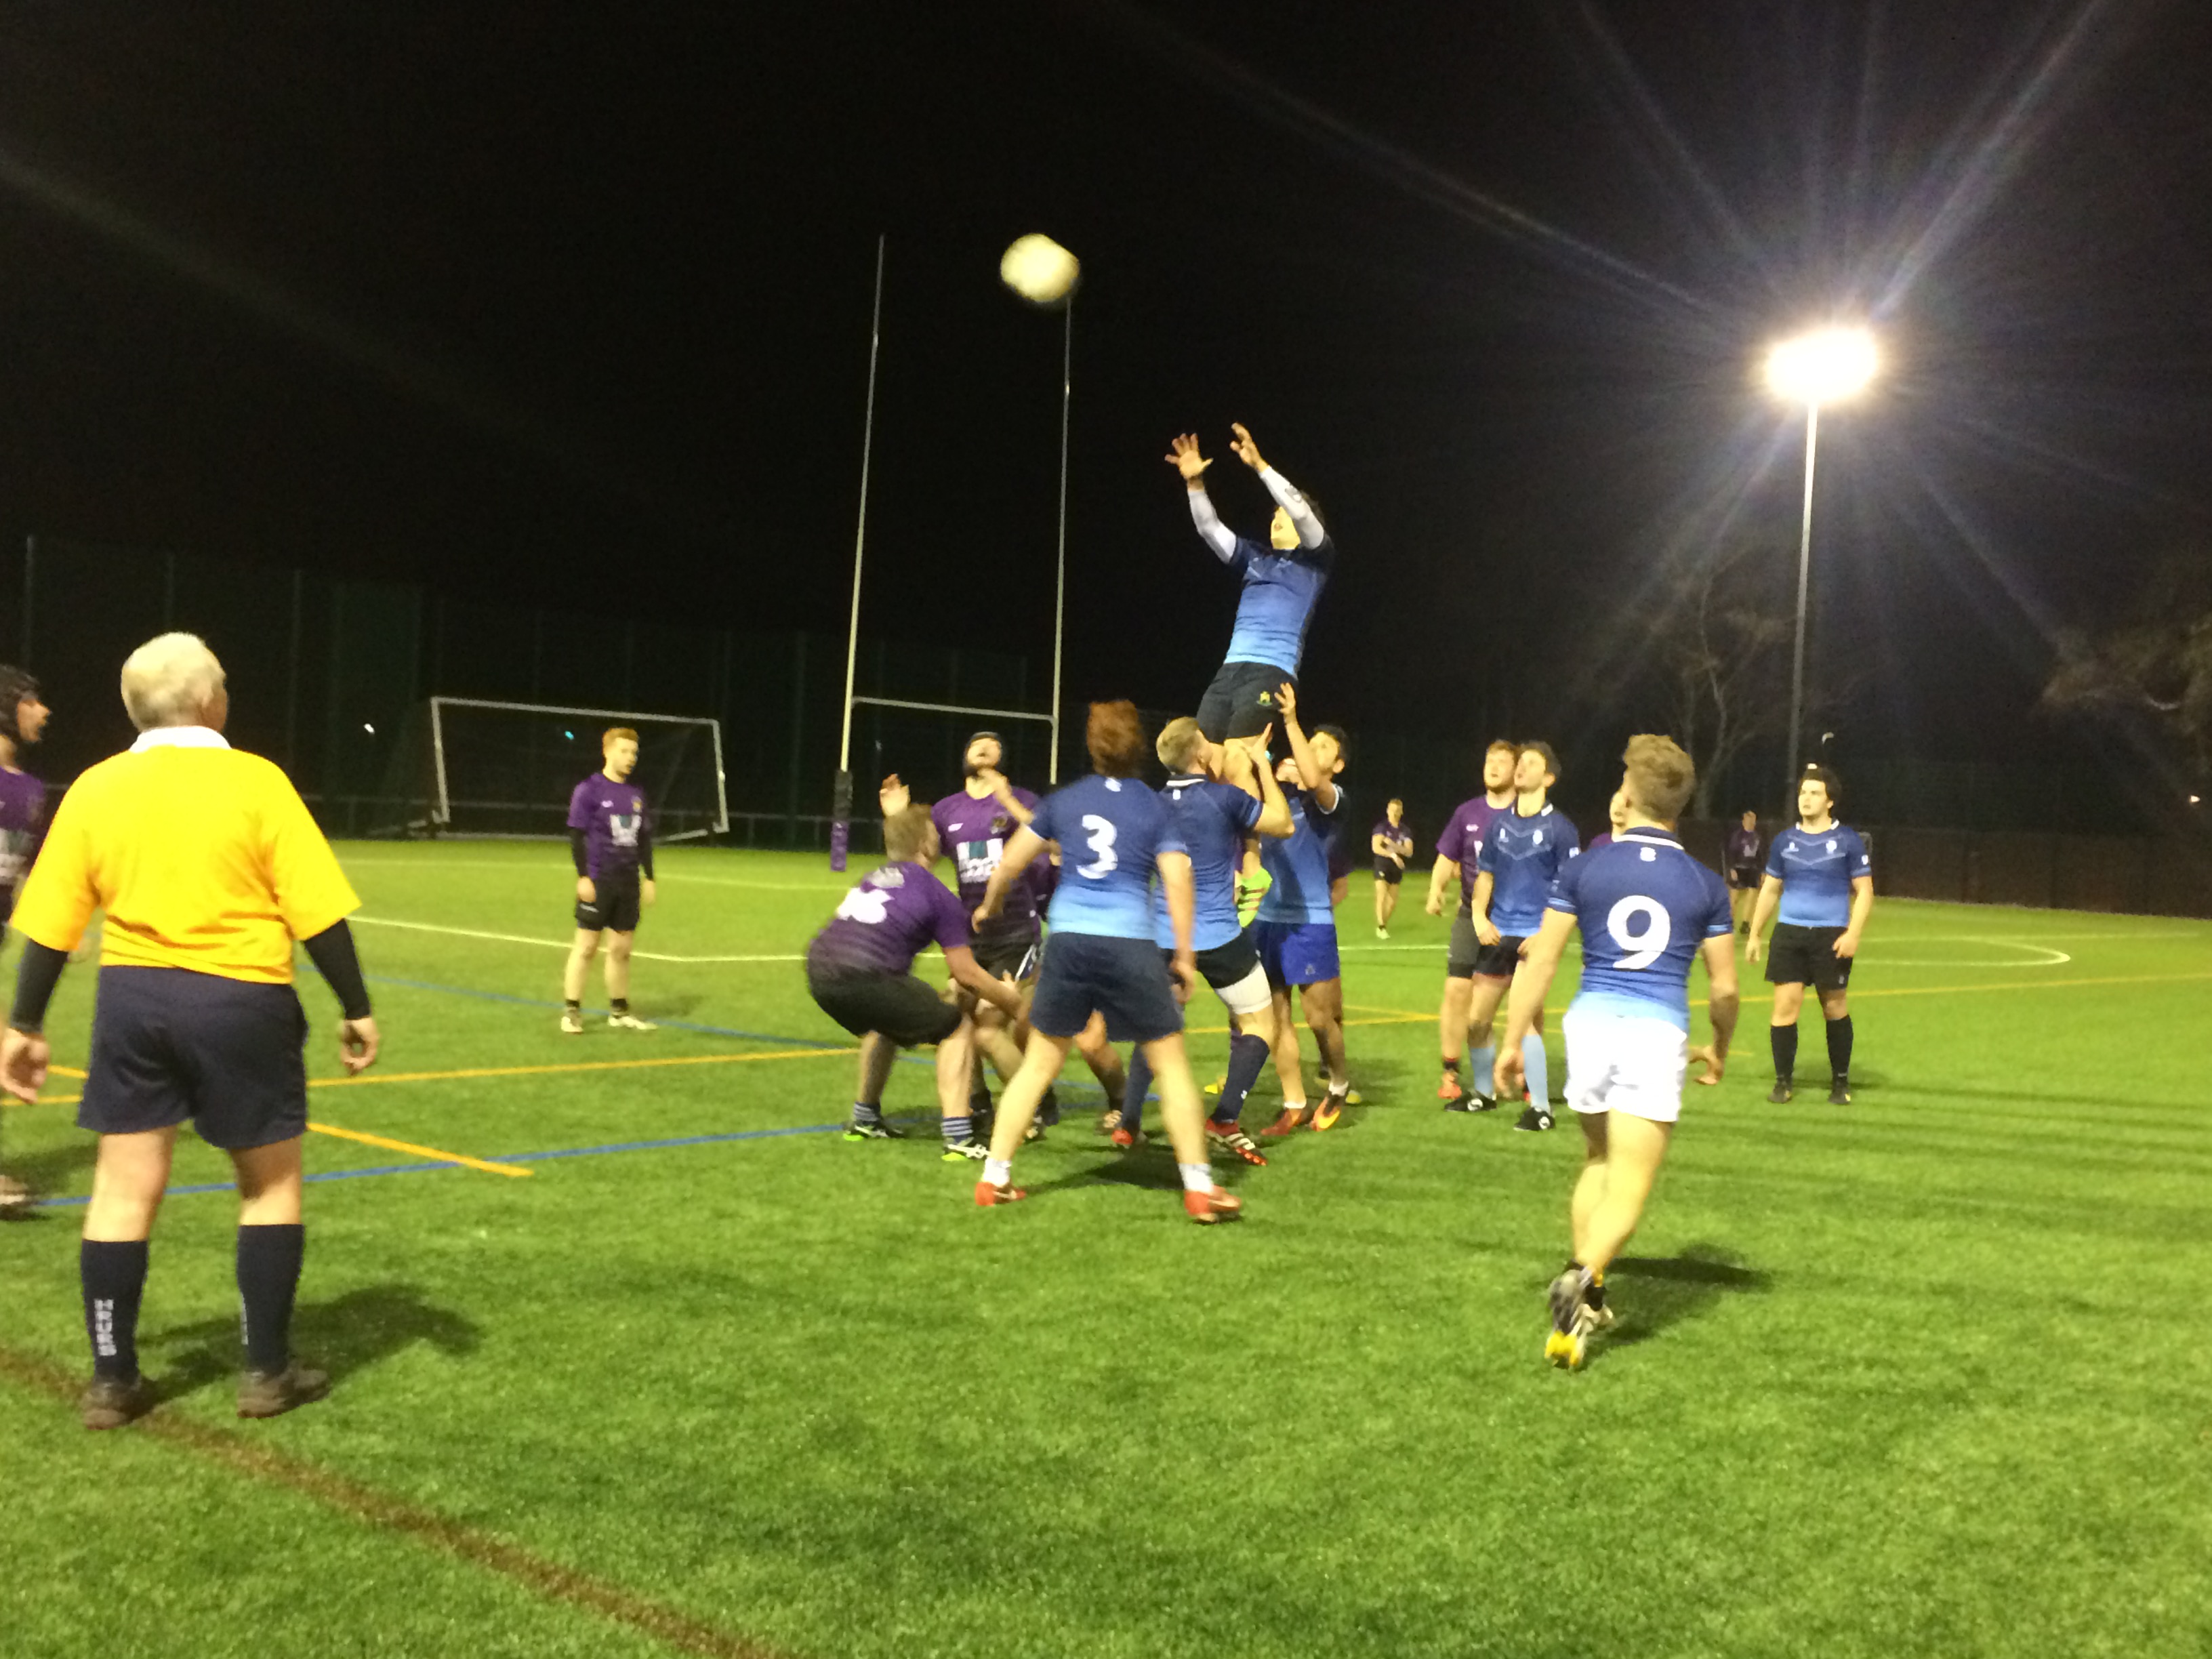 Kingston University men’s rugby match stopped early as they thrash Portsmouth in the cup